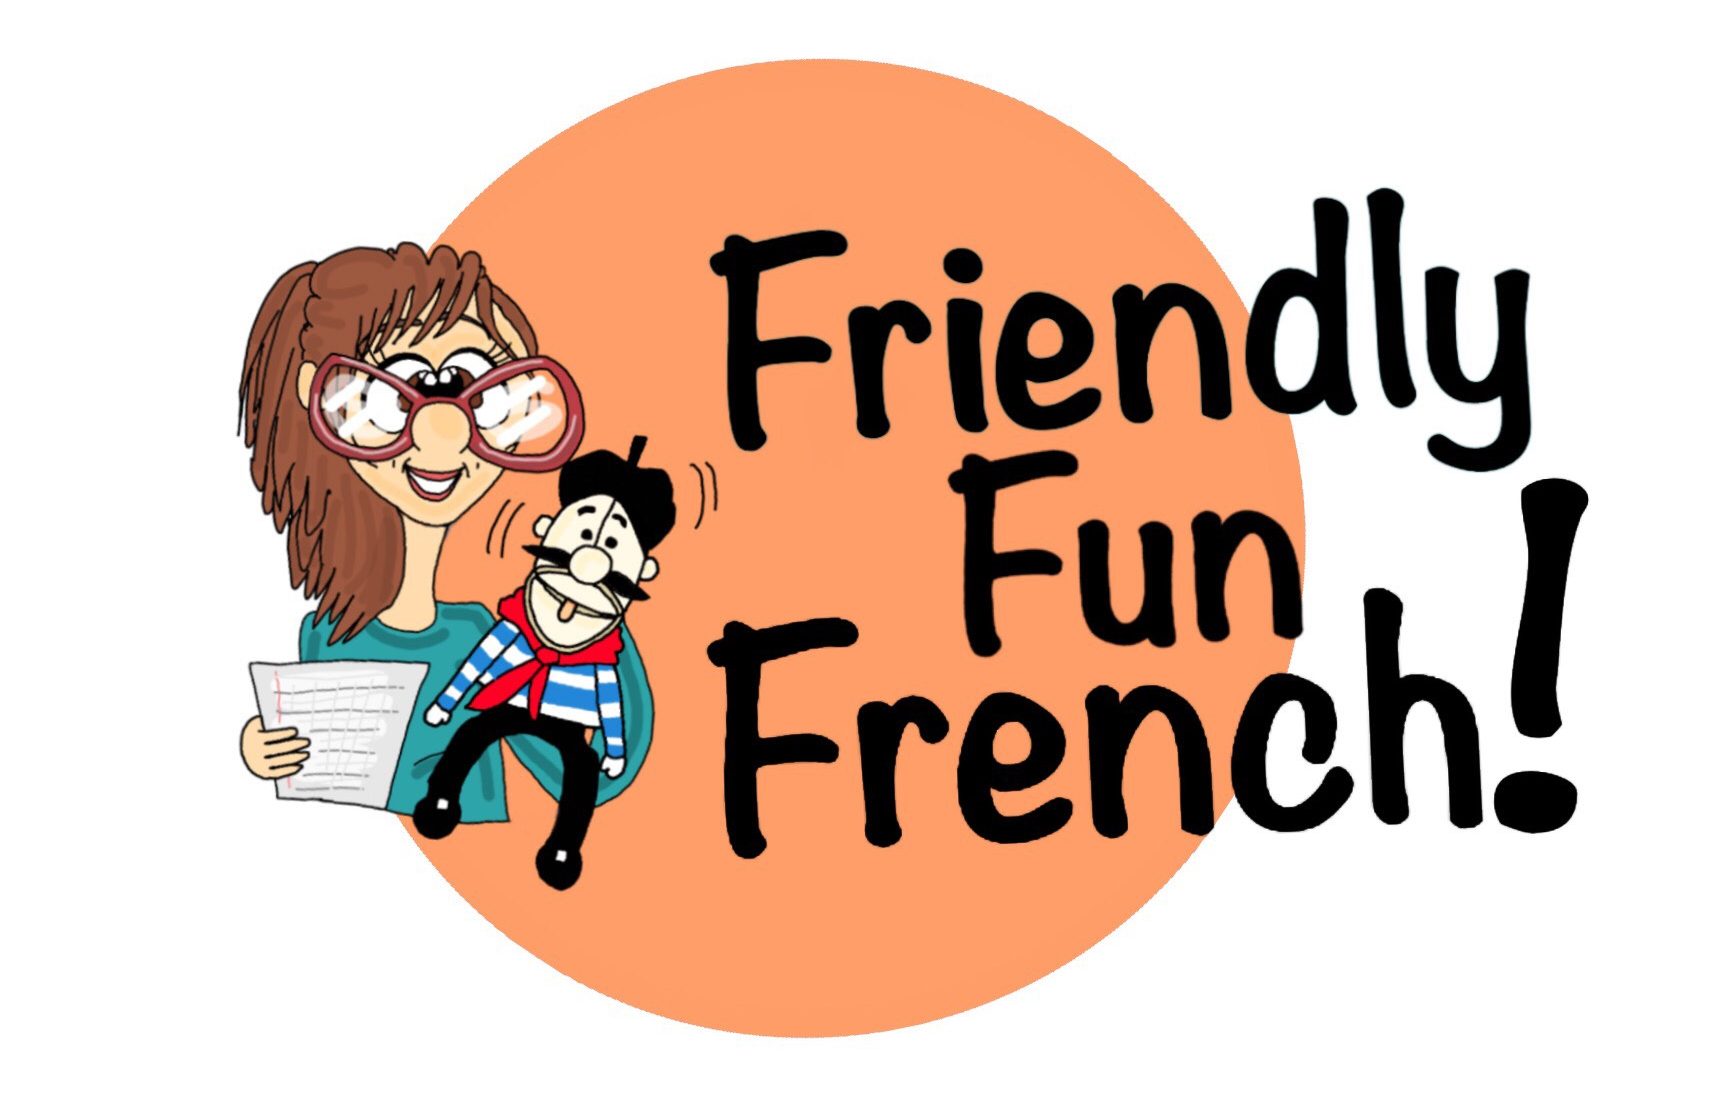 Face-to-face and Online French classes